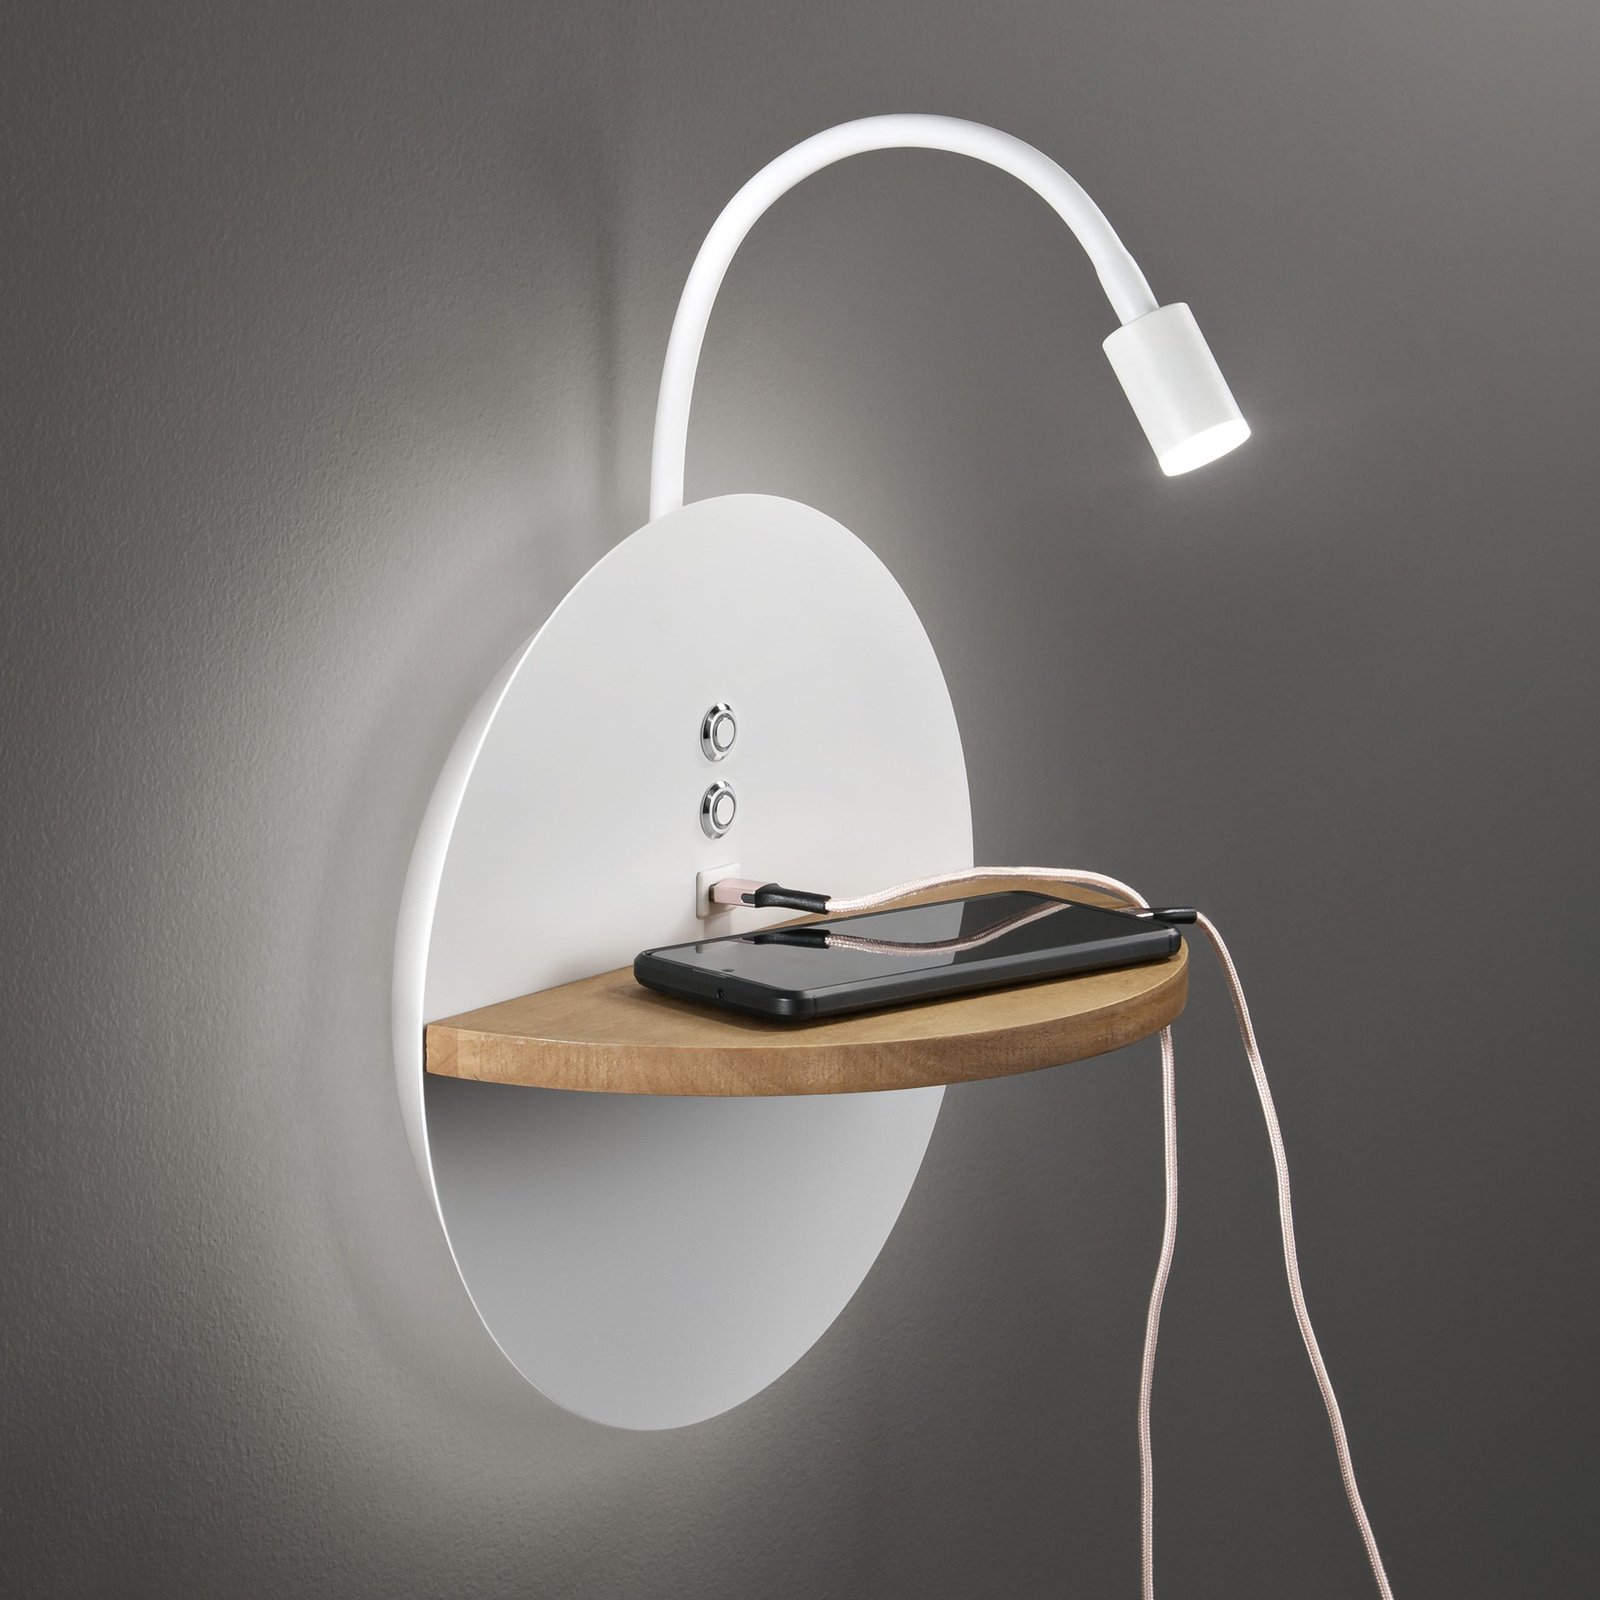 LED reading lamp Dual, backlight, wood, shelf, dimmable